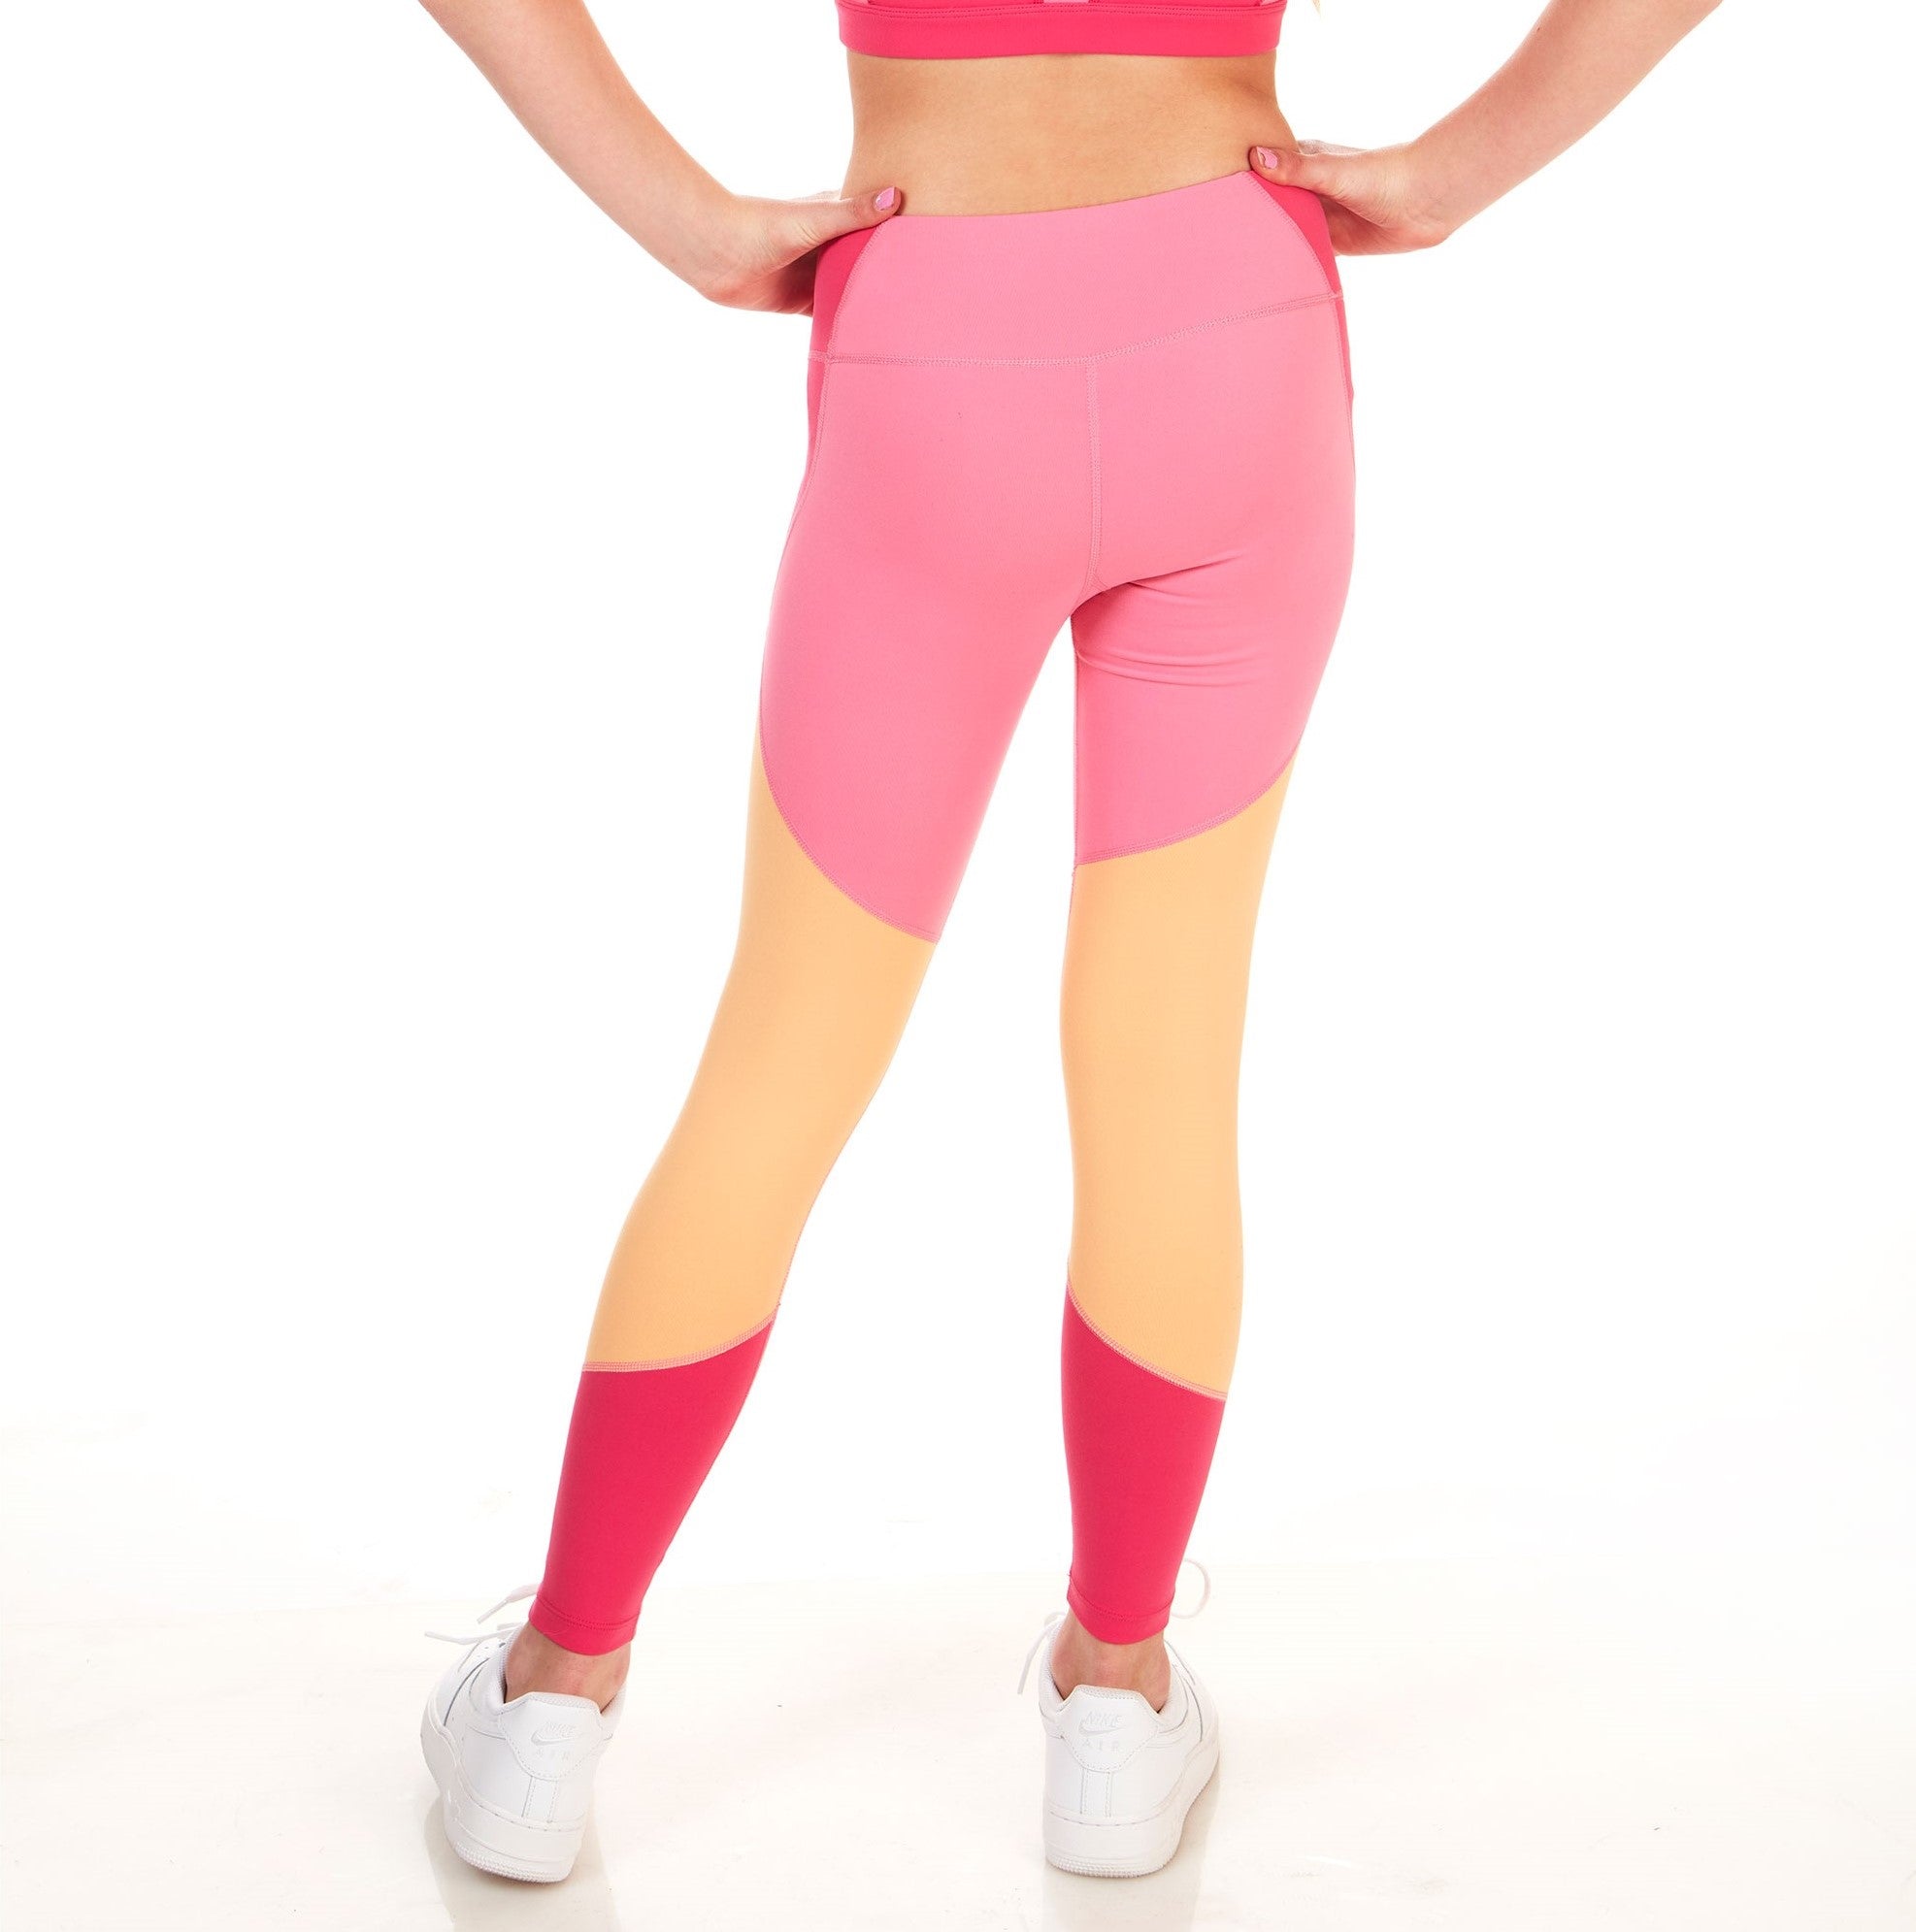 Level up your look for less with 15% off Pink Soda Leggings